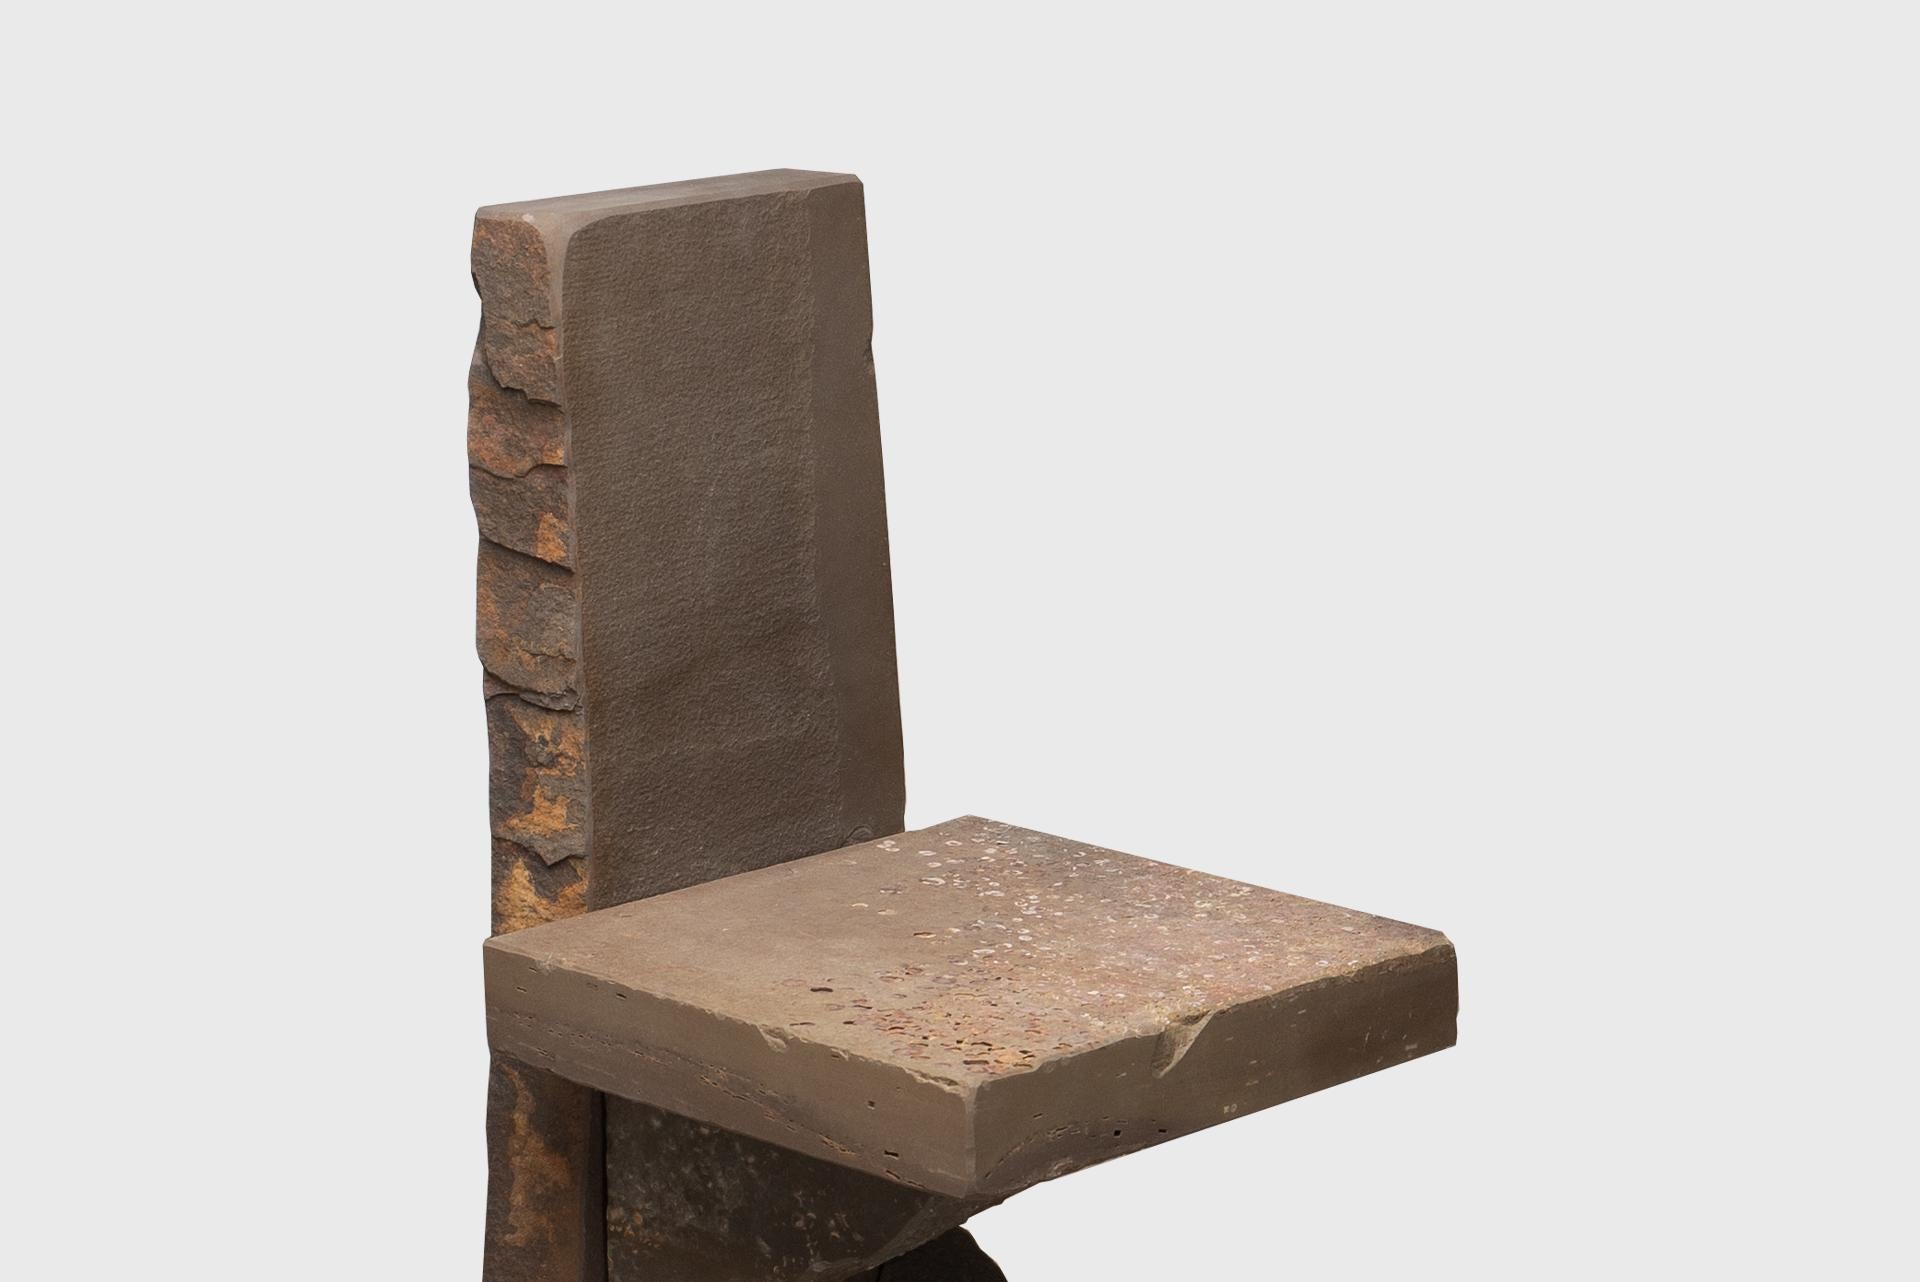 Contemporary Natural Chair 21, Graywacke Offcut Gray Stone, Carsten in Der Elst For Sale 5